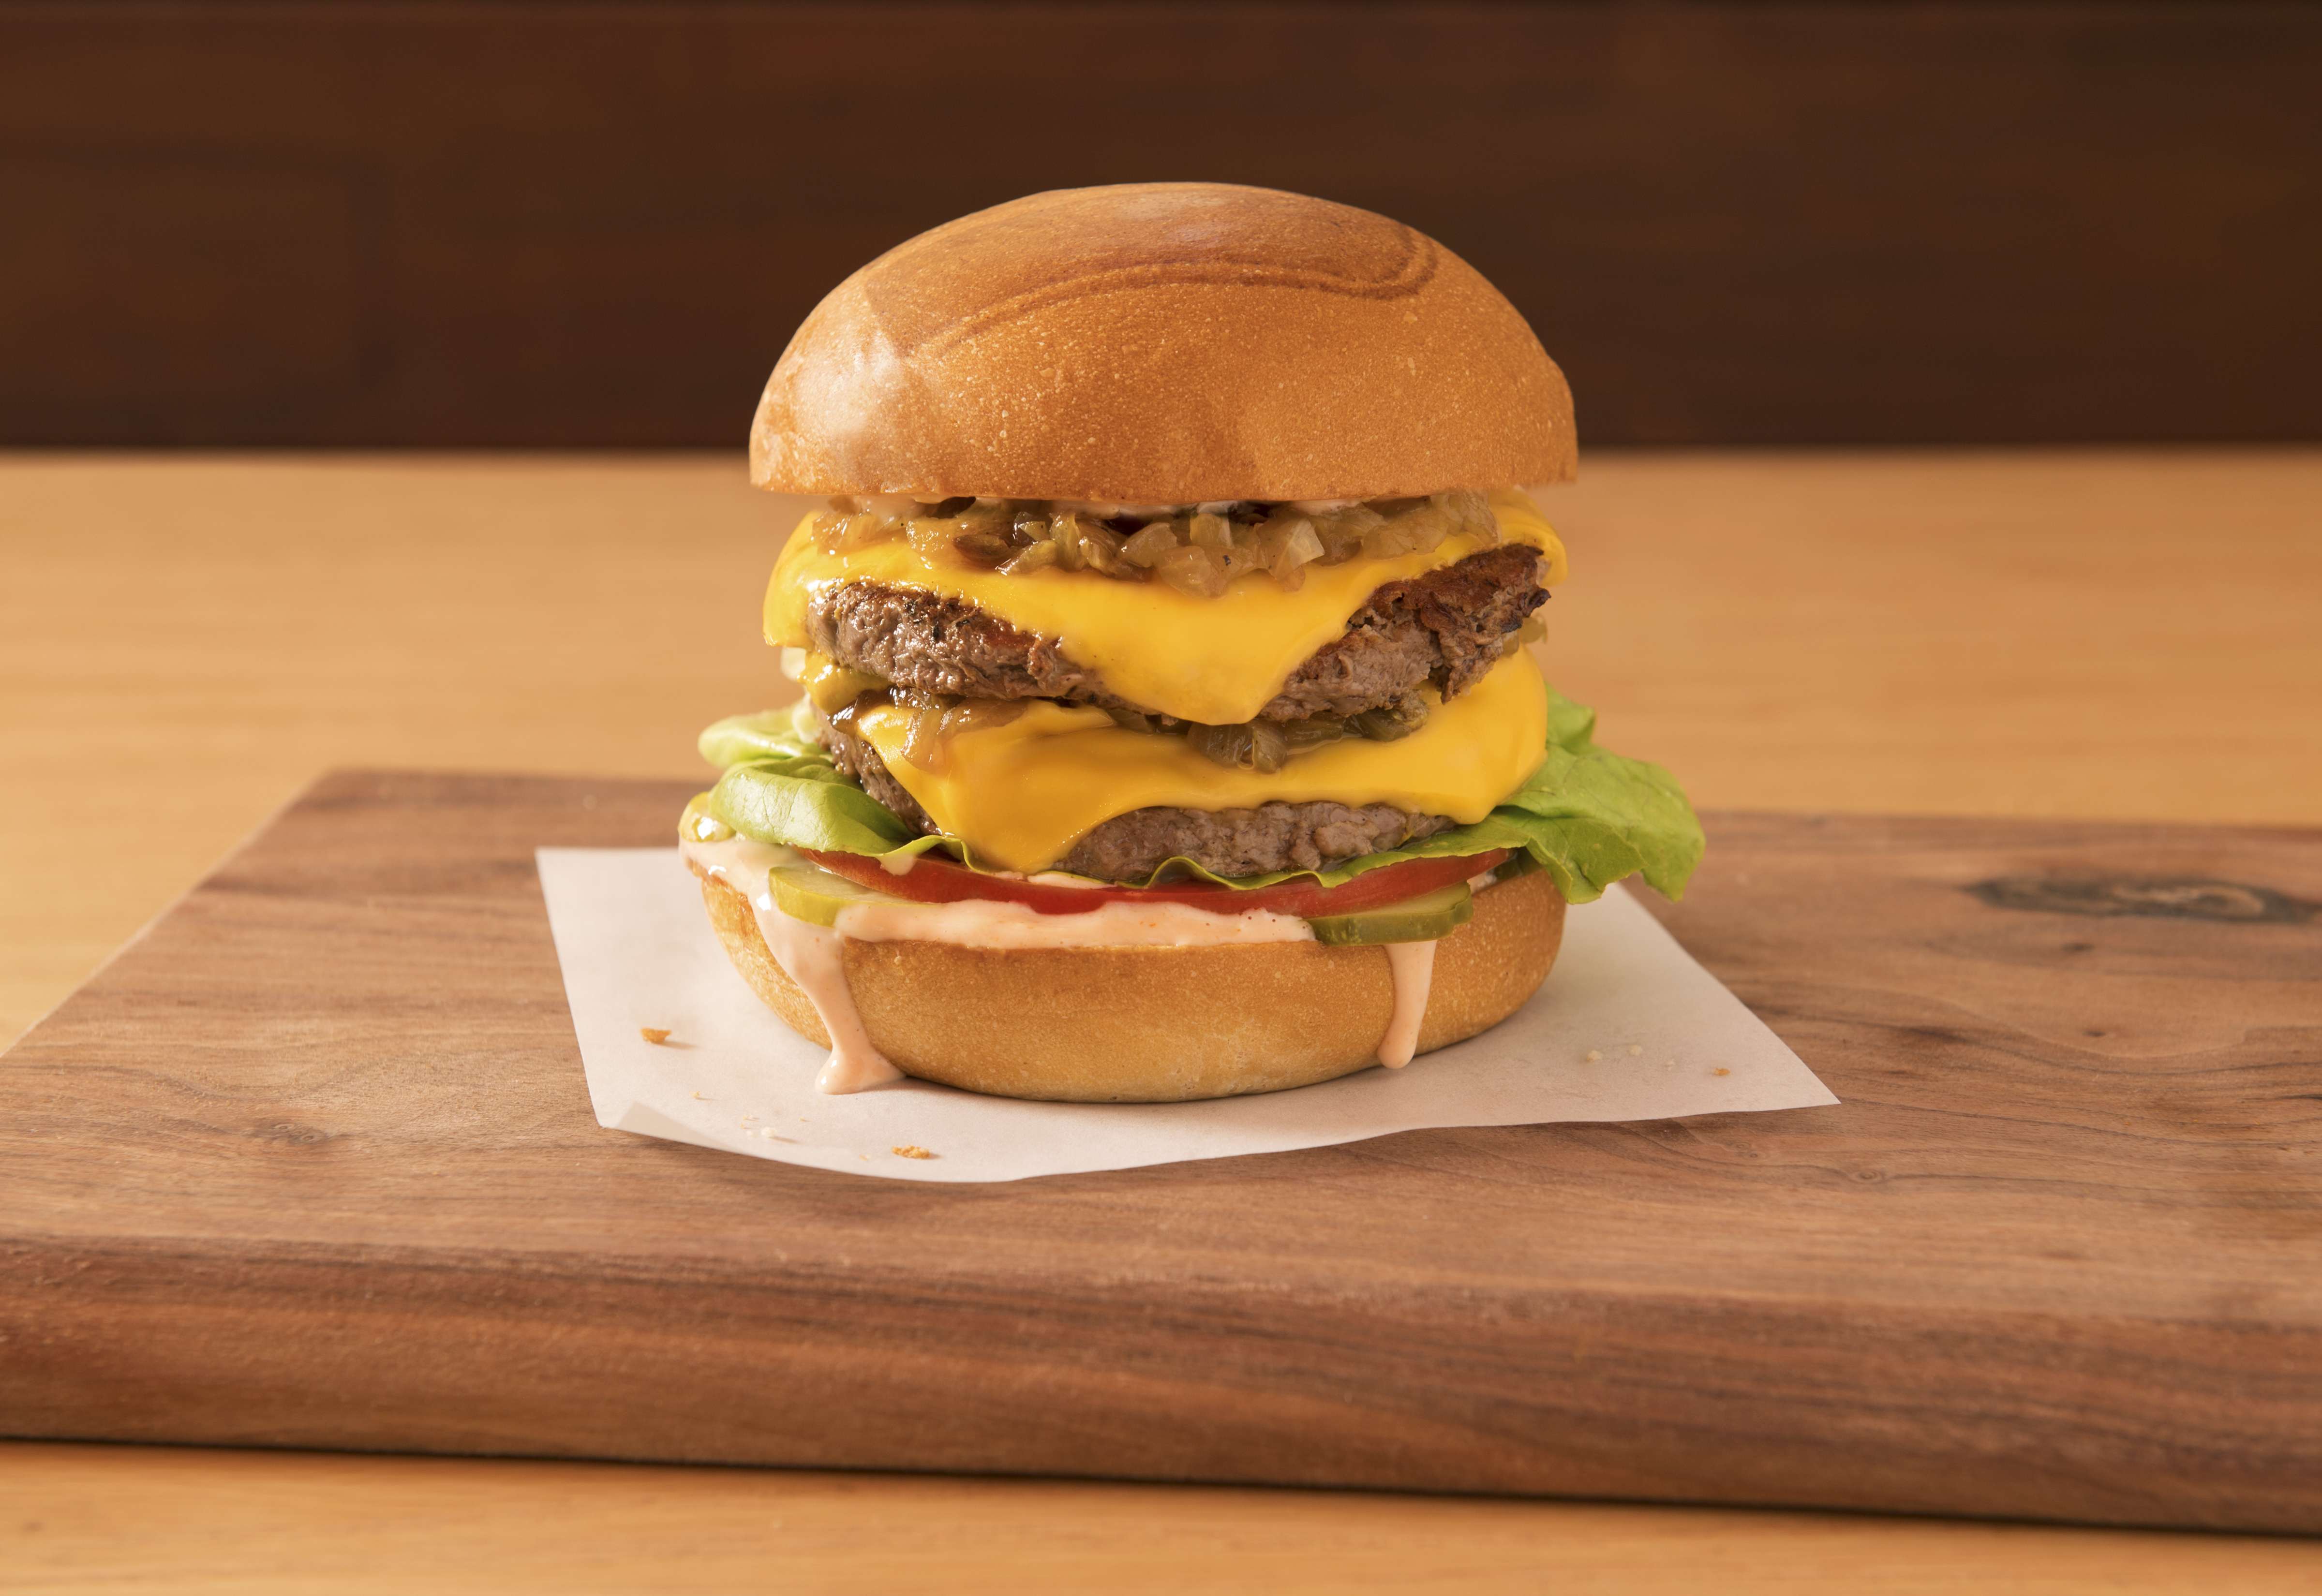 A double stack cheeseburger on a wooden board